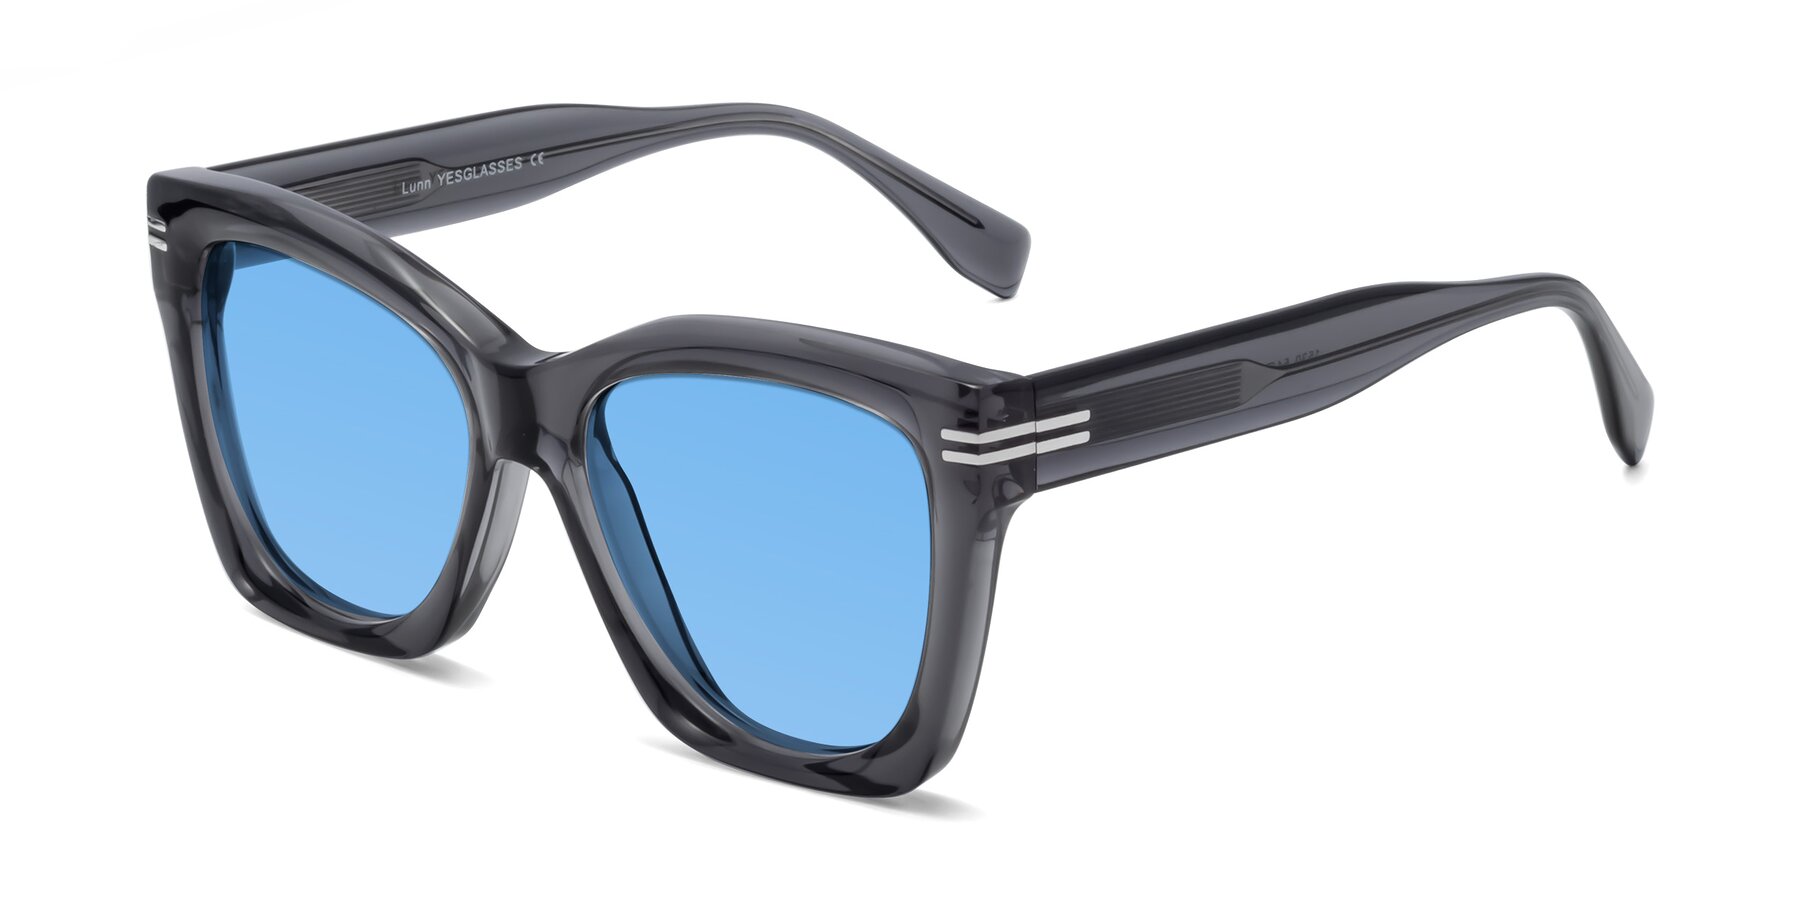 Angle of Lunn in Translucent Gray with Medium Blue Tinted Lenses